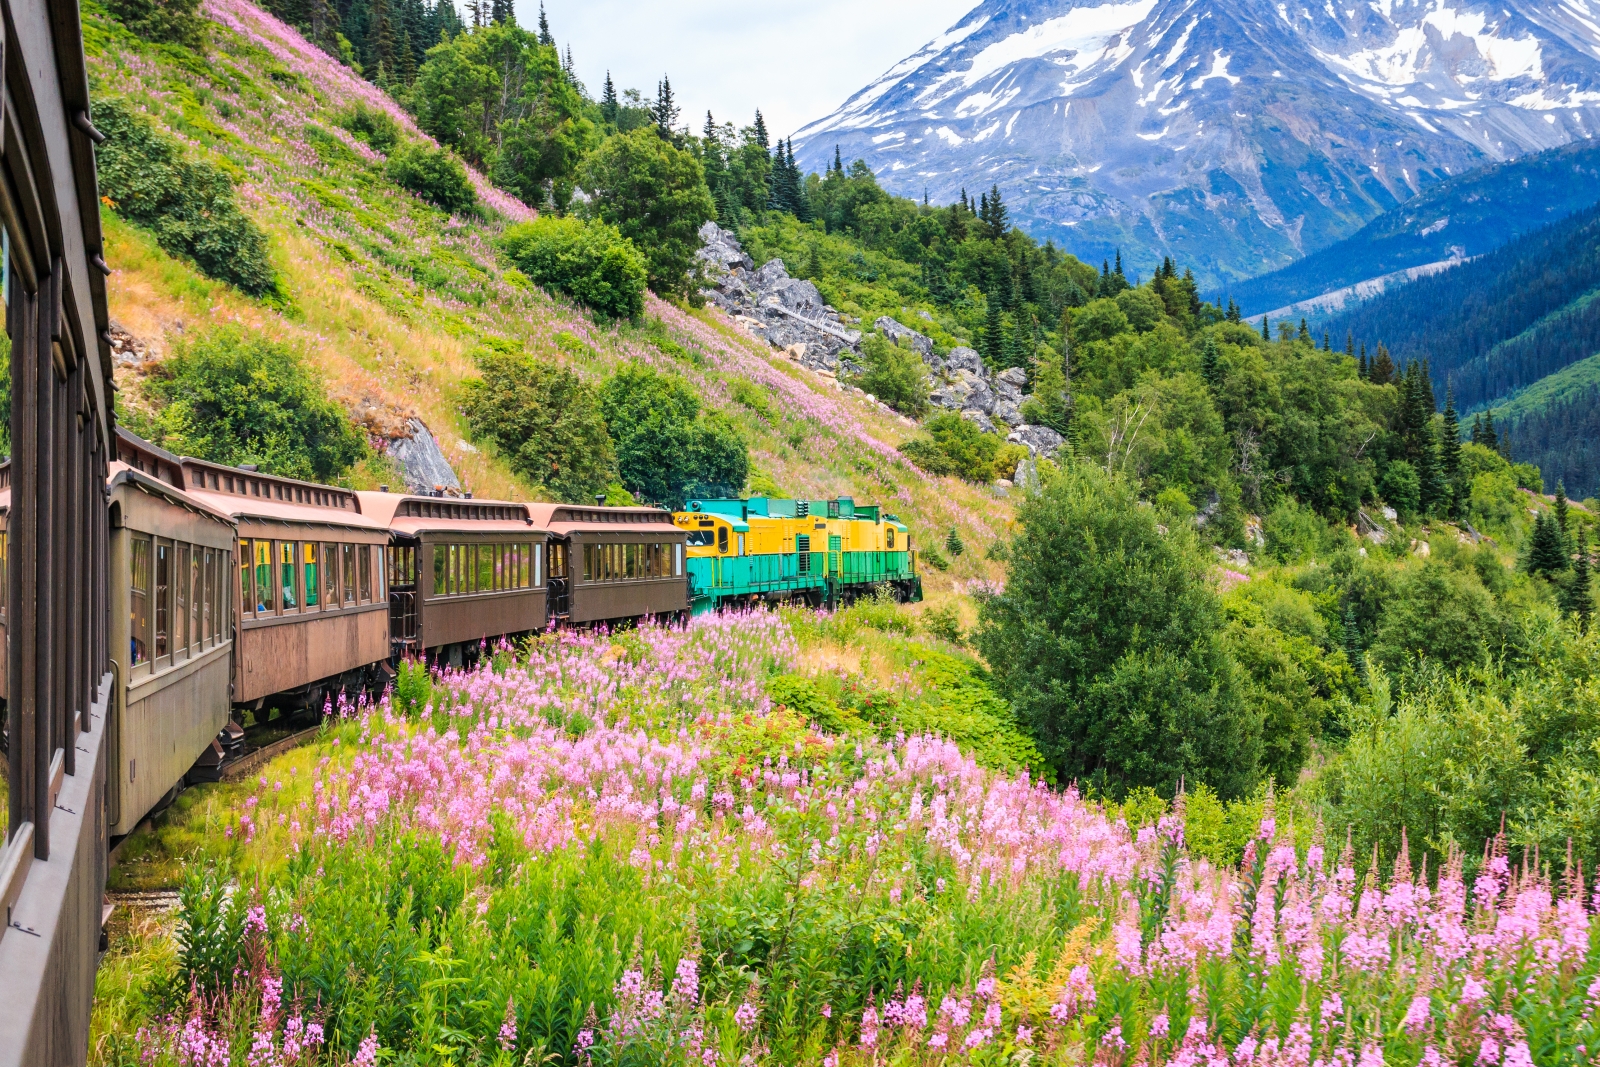 A carriage train winds through the mountains